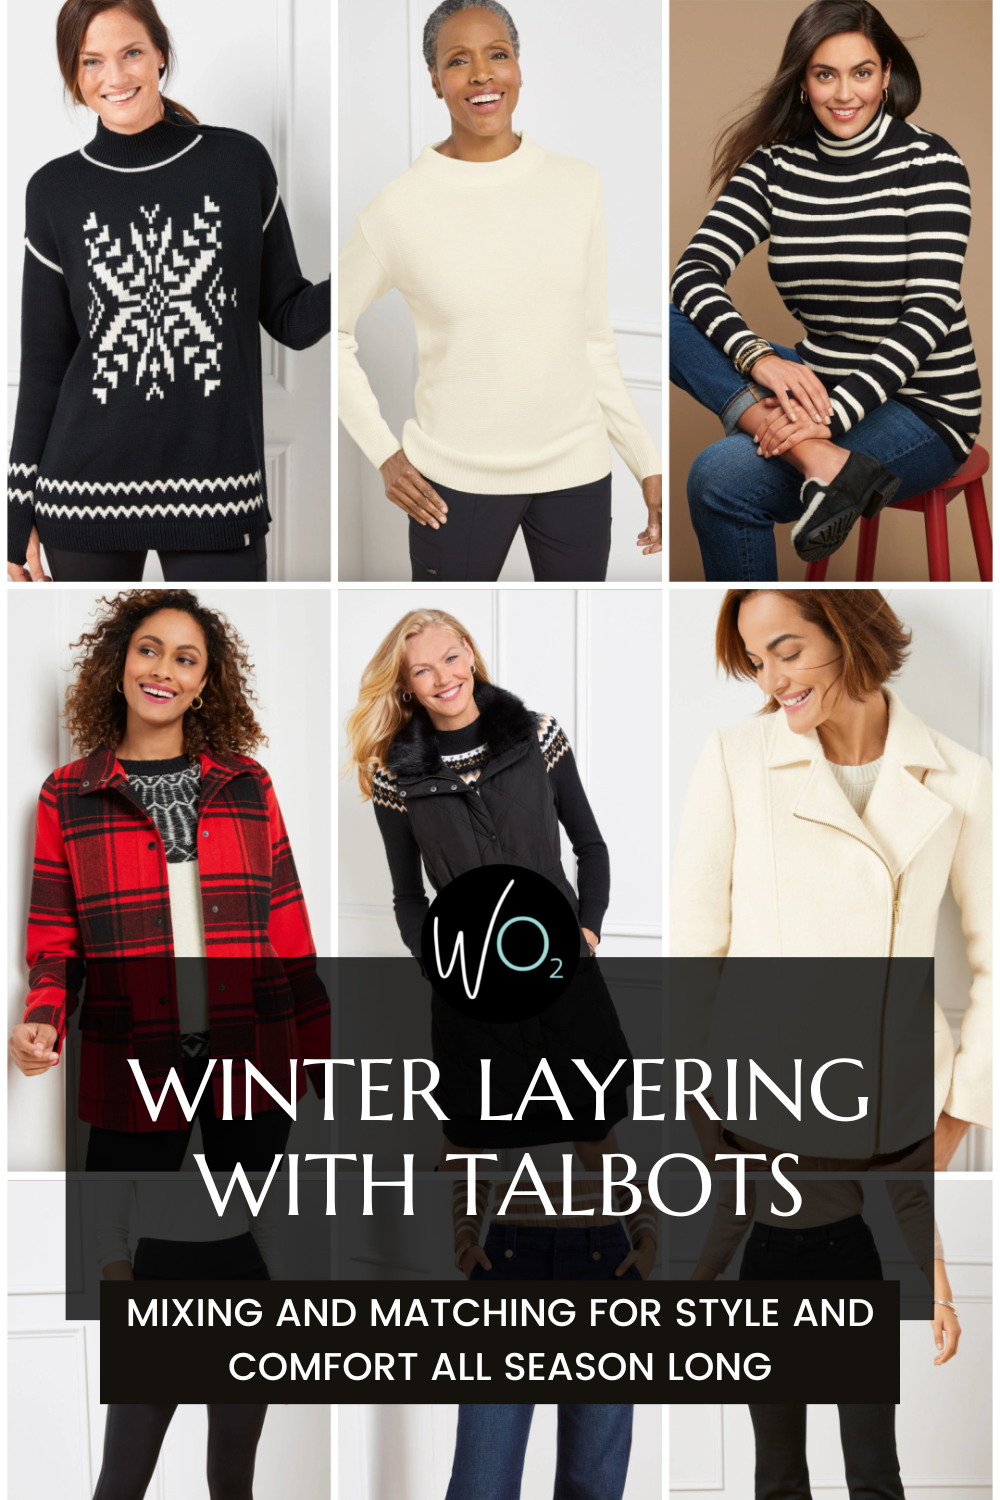 Winter Layering with Talbots